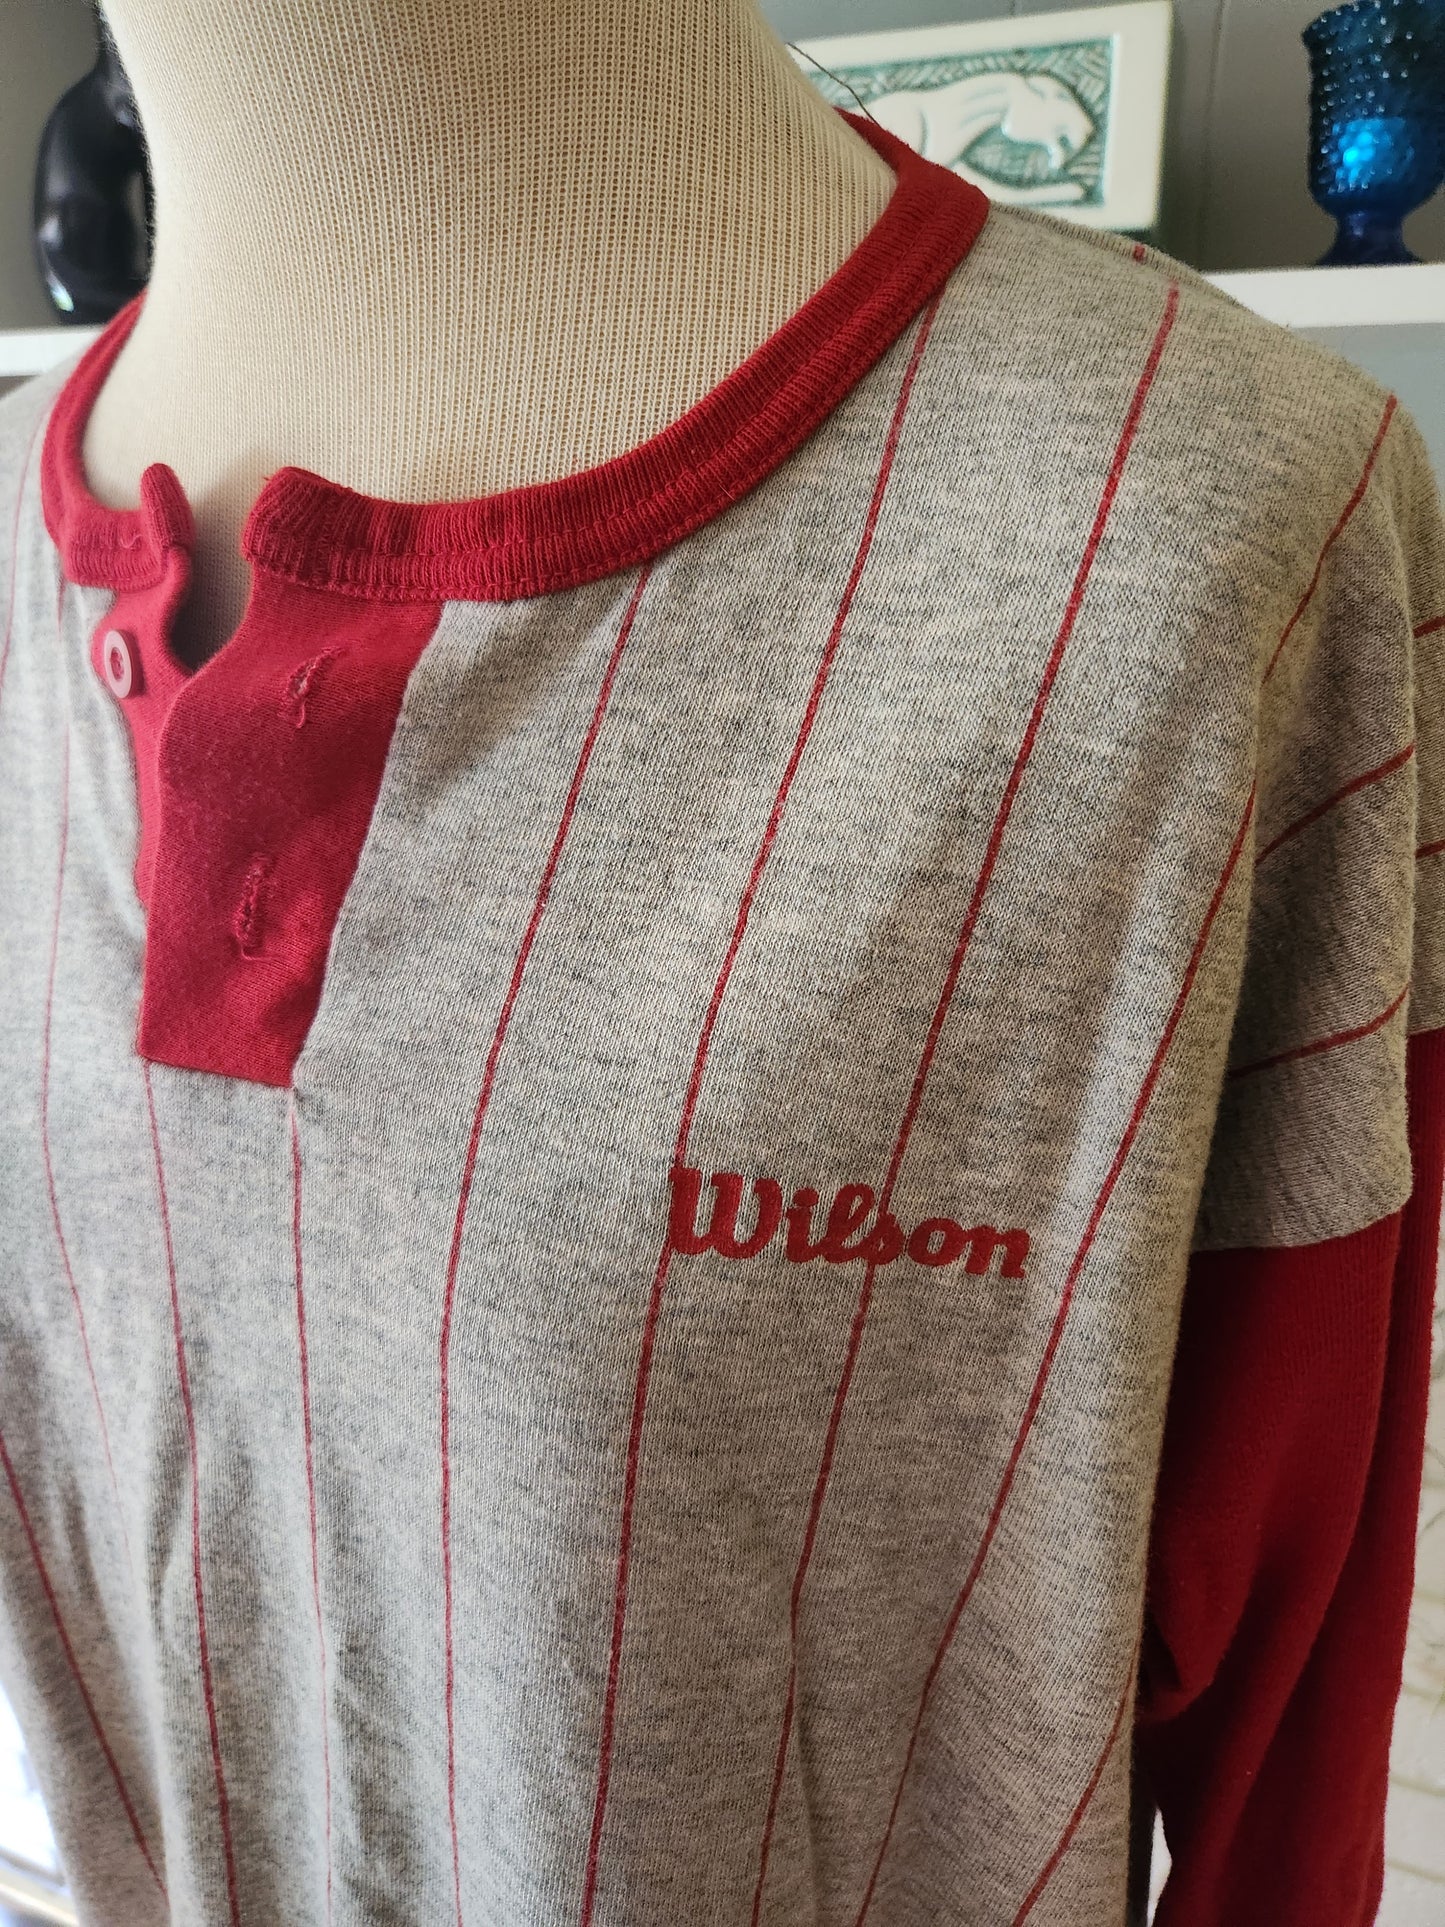 Vintage Red and Gray Pinstriped Raglan T Shirt by Wilson